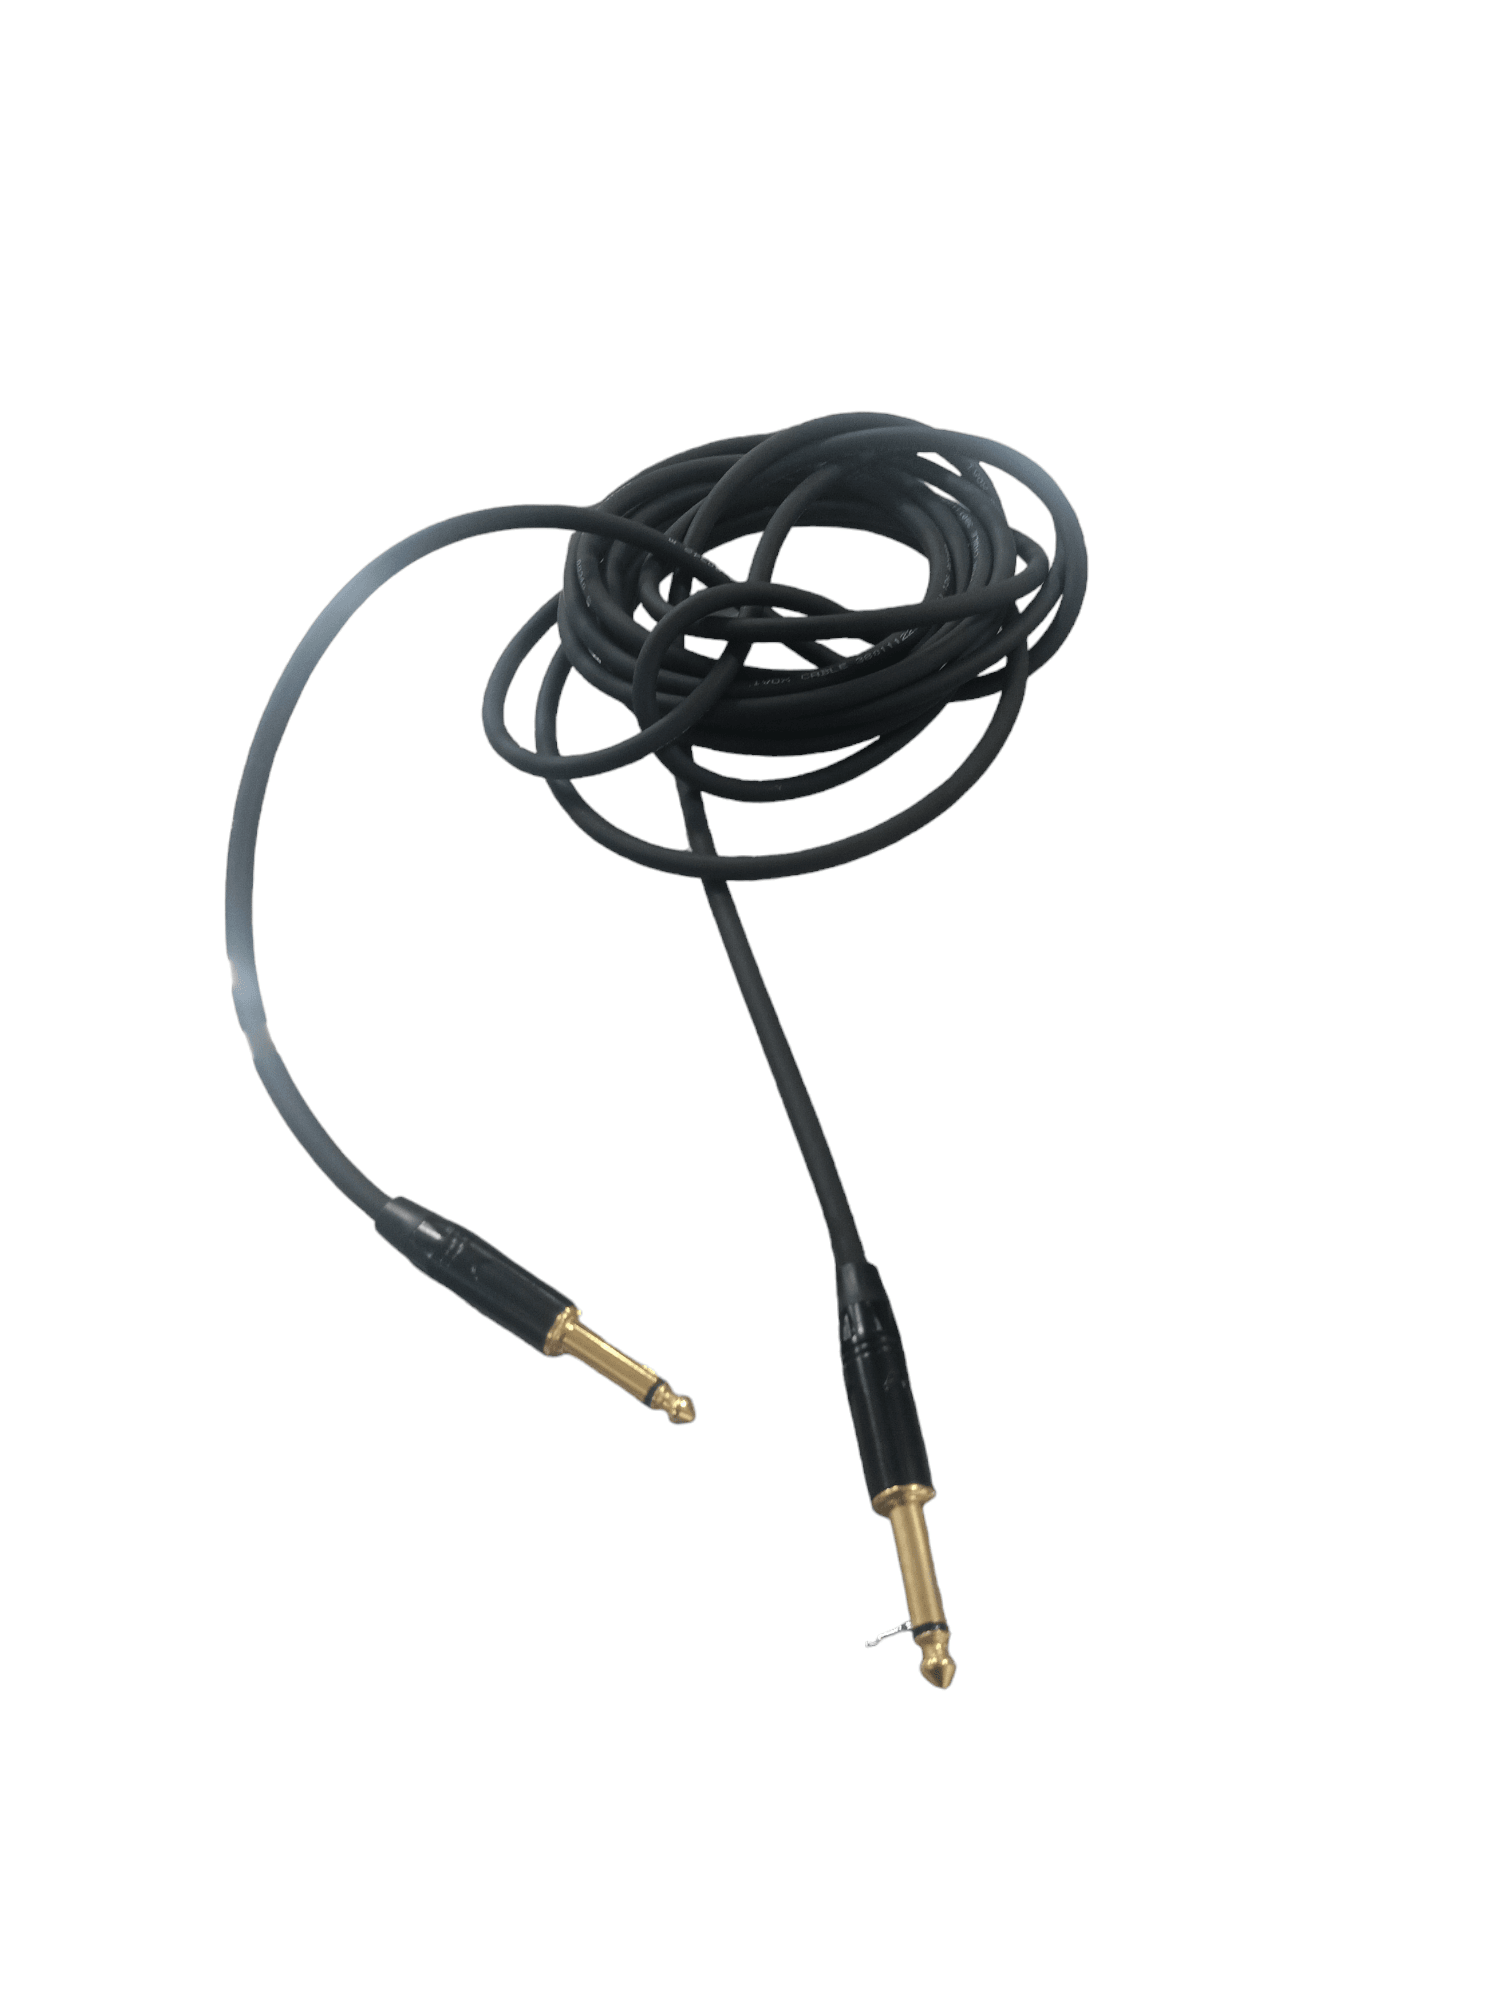 5 METER INSTRUMENT CABLE